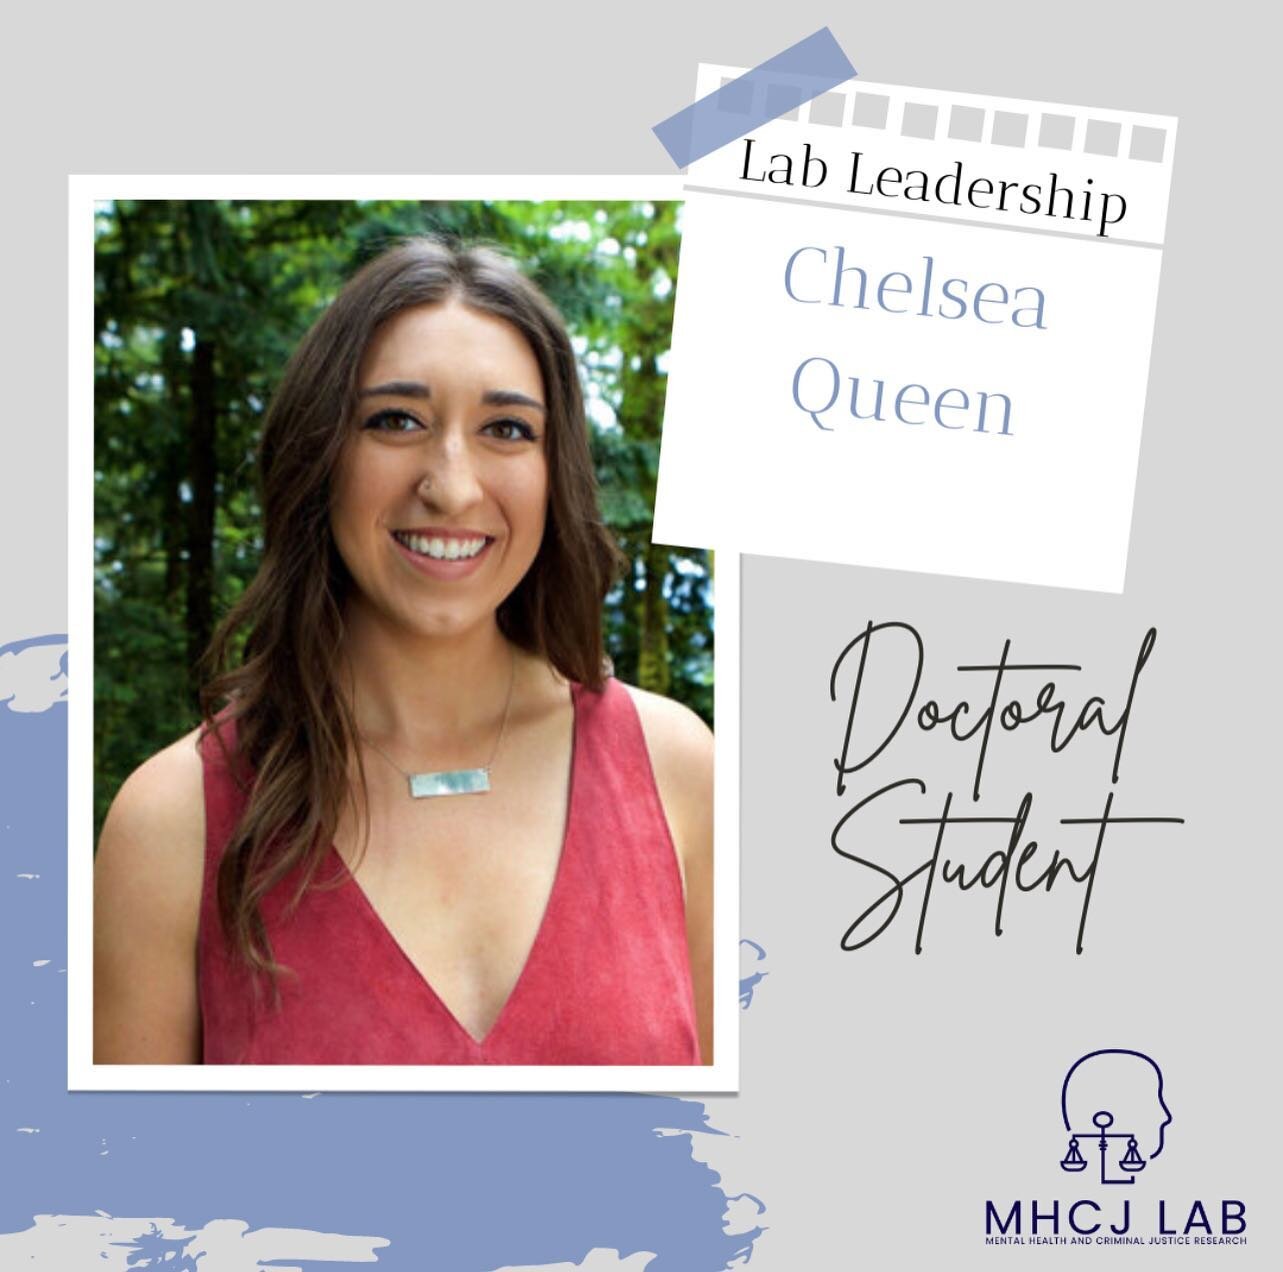 We would like to introduce one of our graduate students: Chelsea Queen 

Chelsea's research interests focus on pre-adjudication policy reform, specifically at the effectiveness of pretrial risk assessment tools and release on pretrial supervision. Ad